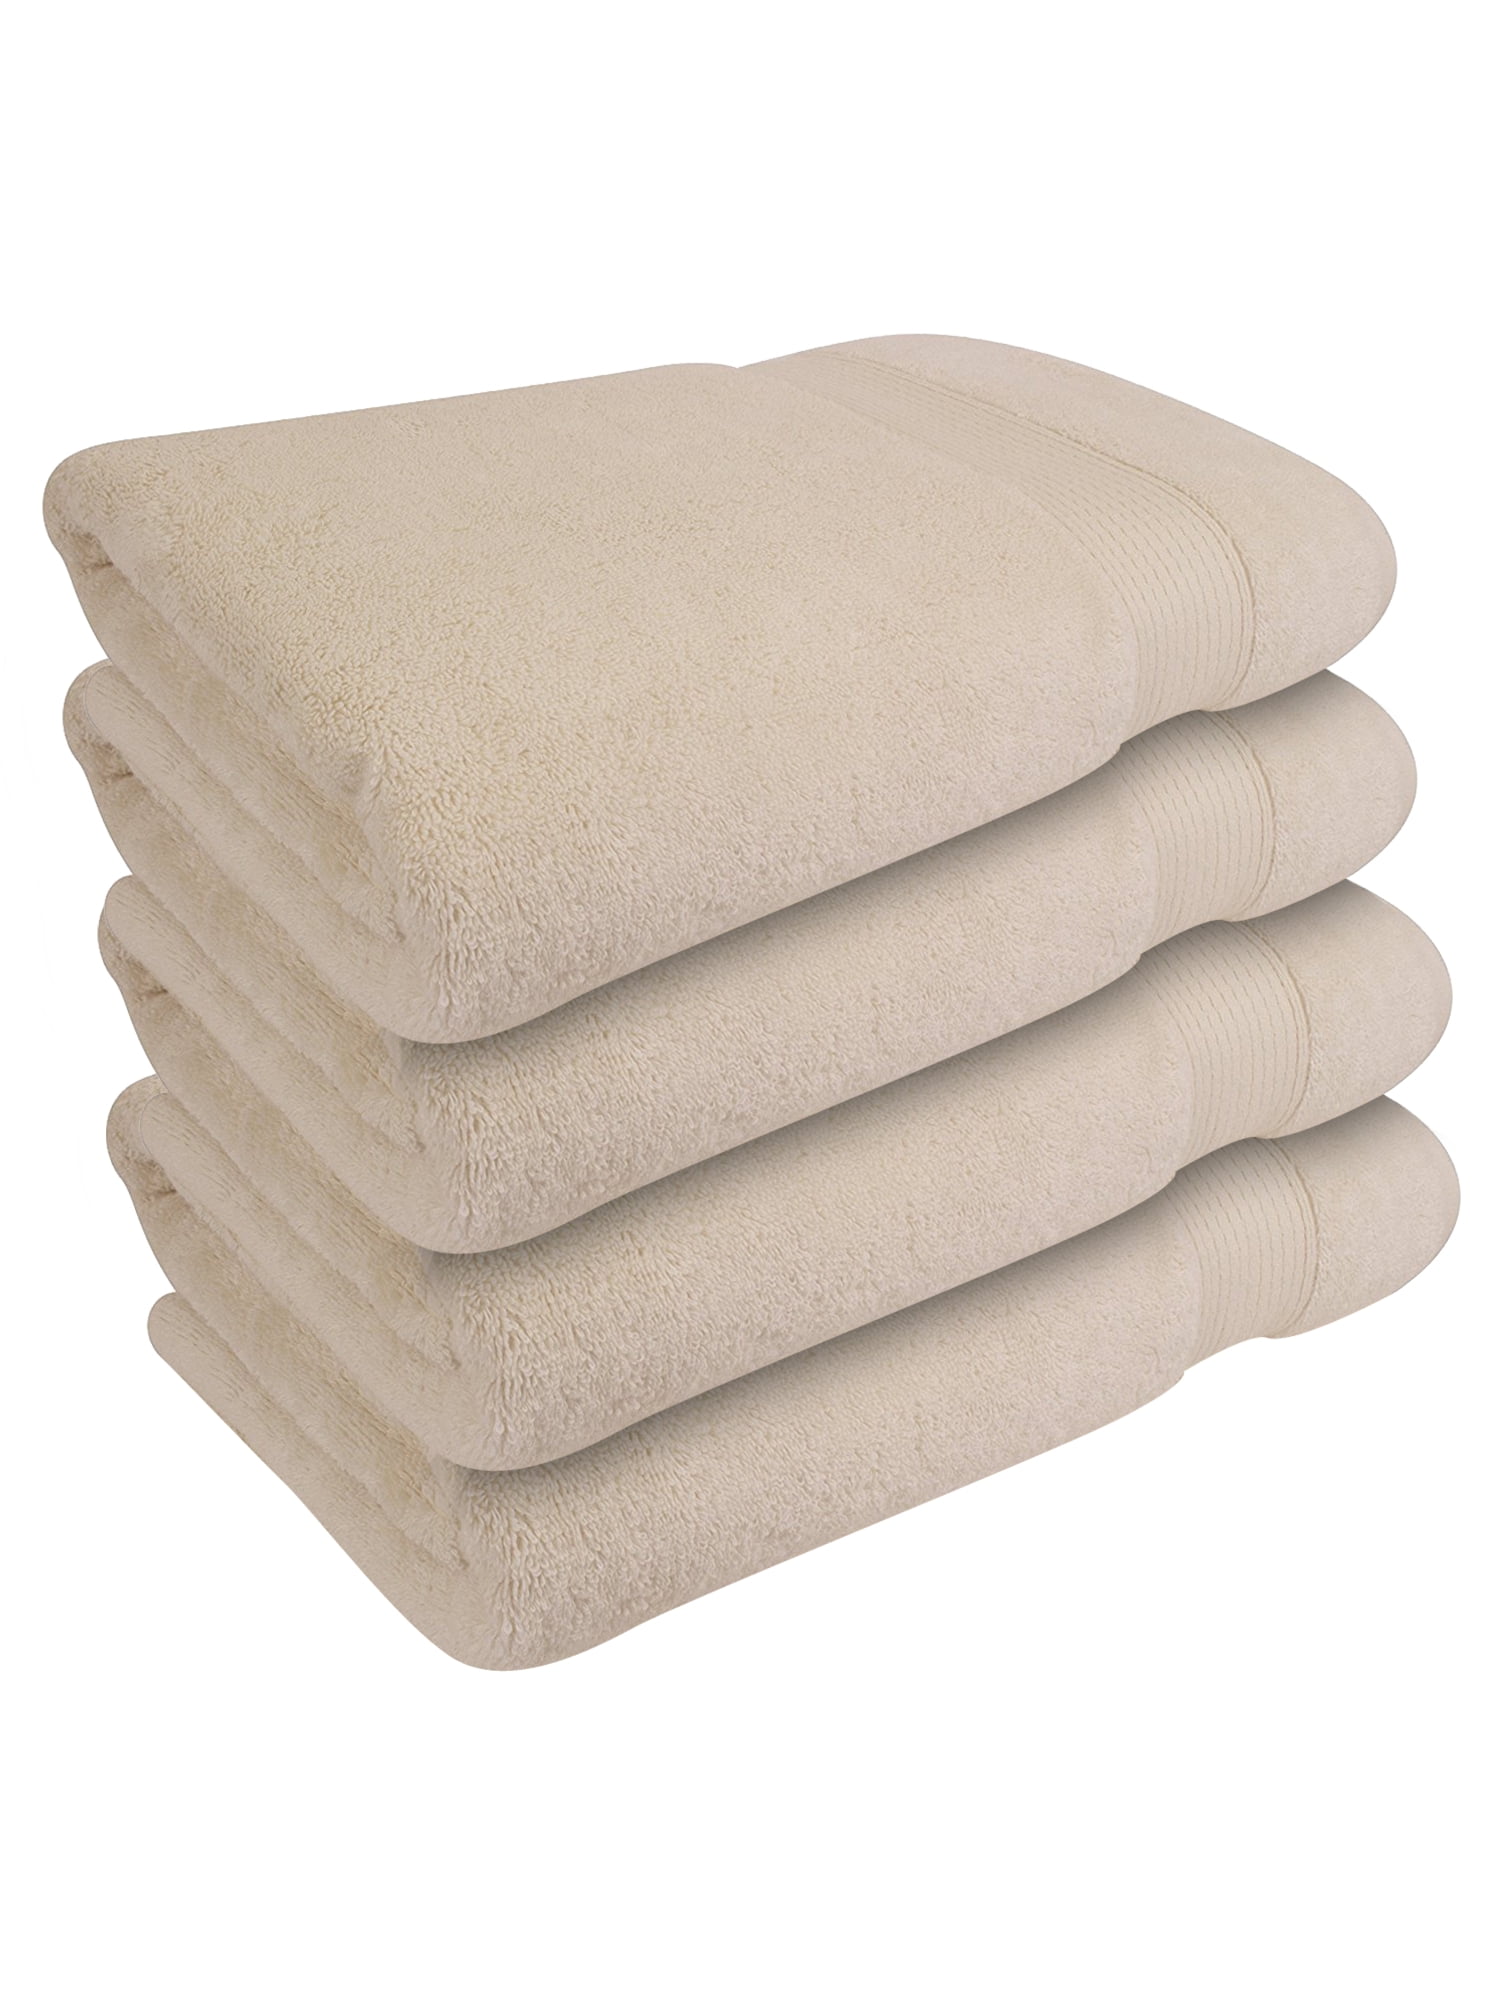 JAPANESE Unbleached Natural 100% COTTON PILE Exfoliating BODY WASH Towel Cloth 